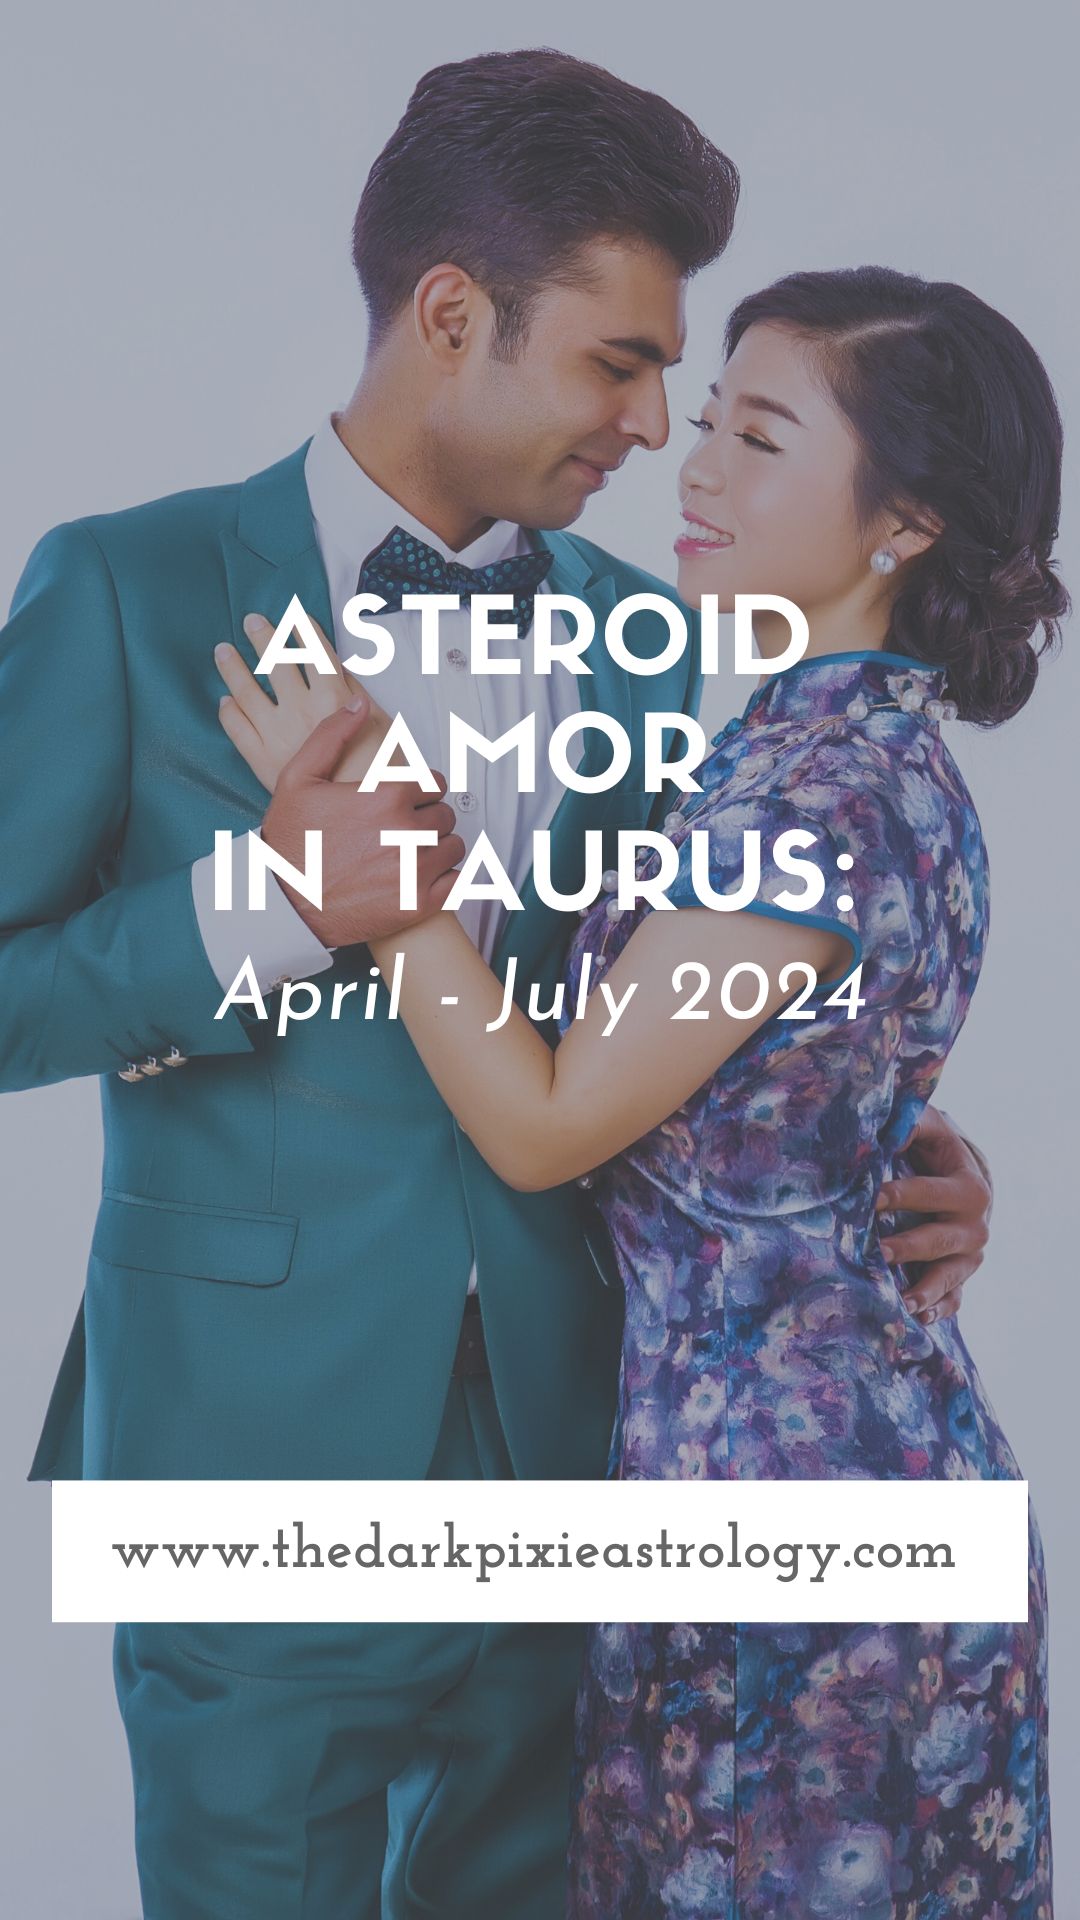 Asteroid Amor in Taurus: April - July 2024 - The Dark Pixie Astrology